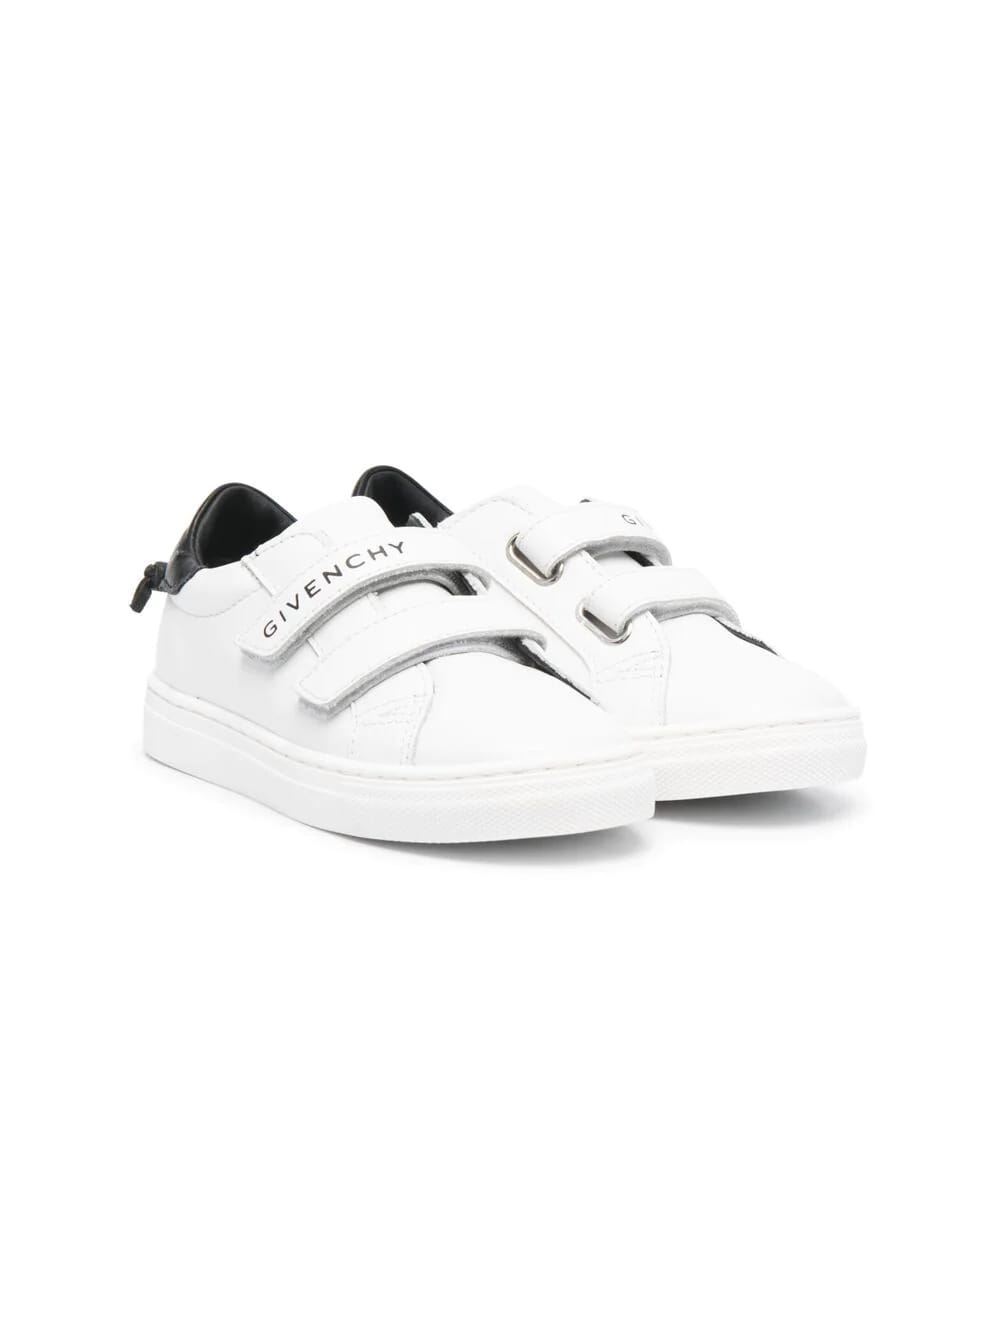 GIVENCHY WHITE AND BLACK URBAN STREET KID SNEAKERS WITH VELCRO,H09021 10B